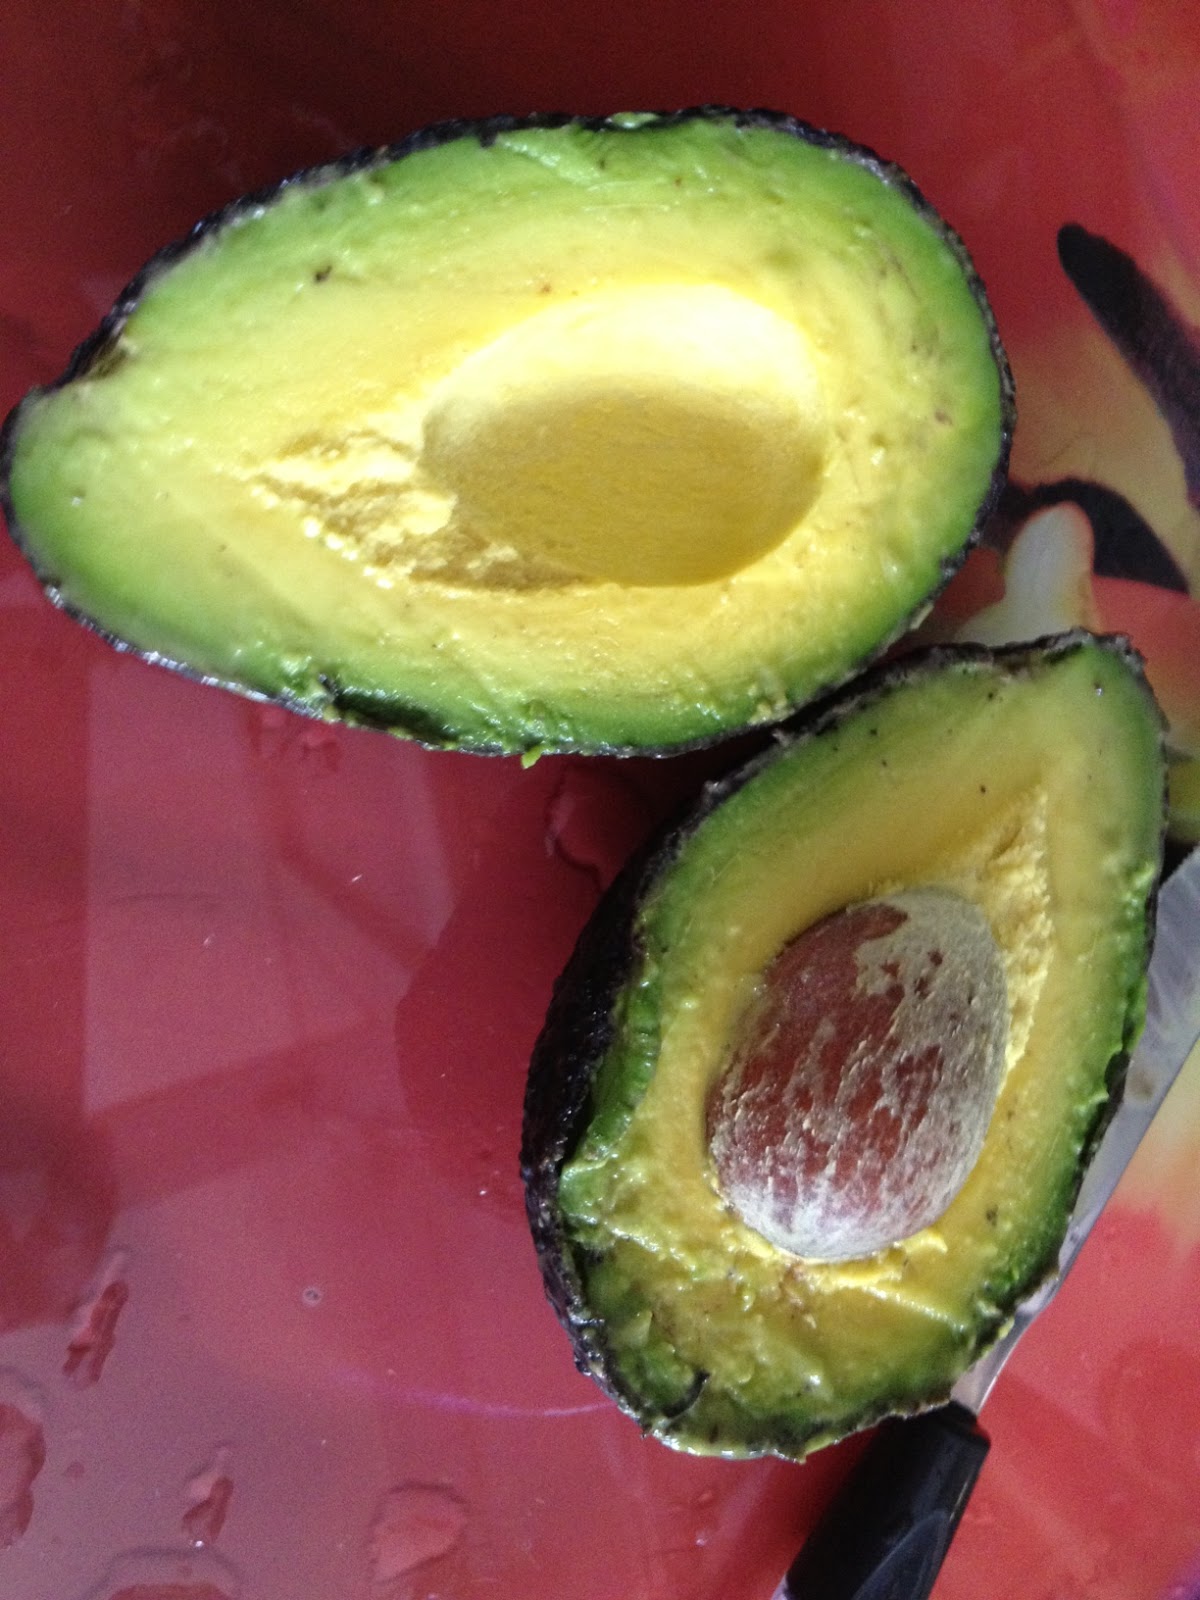 My Wok Life Cooking Blog First Baby Food - Avocado Purée